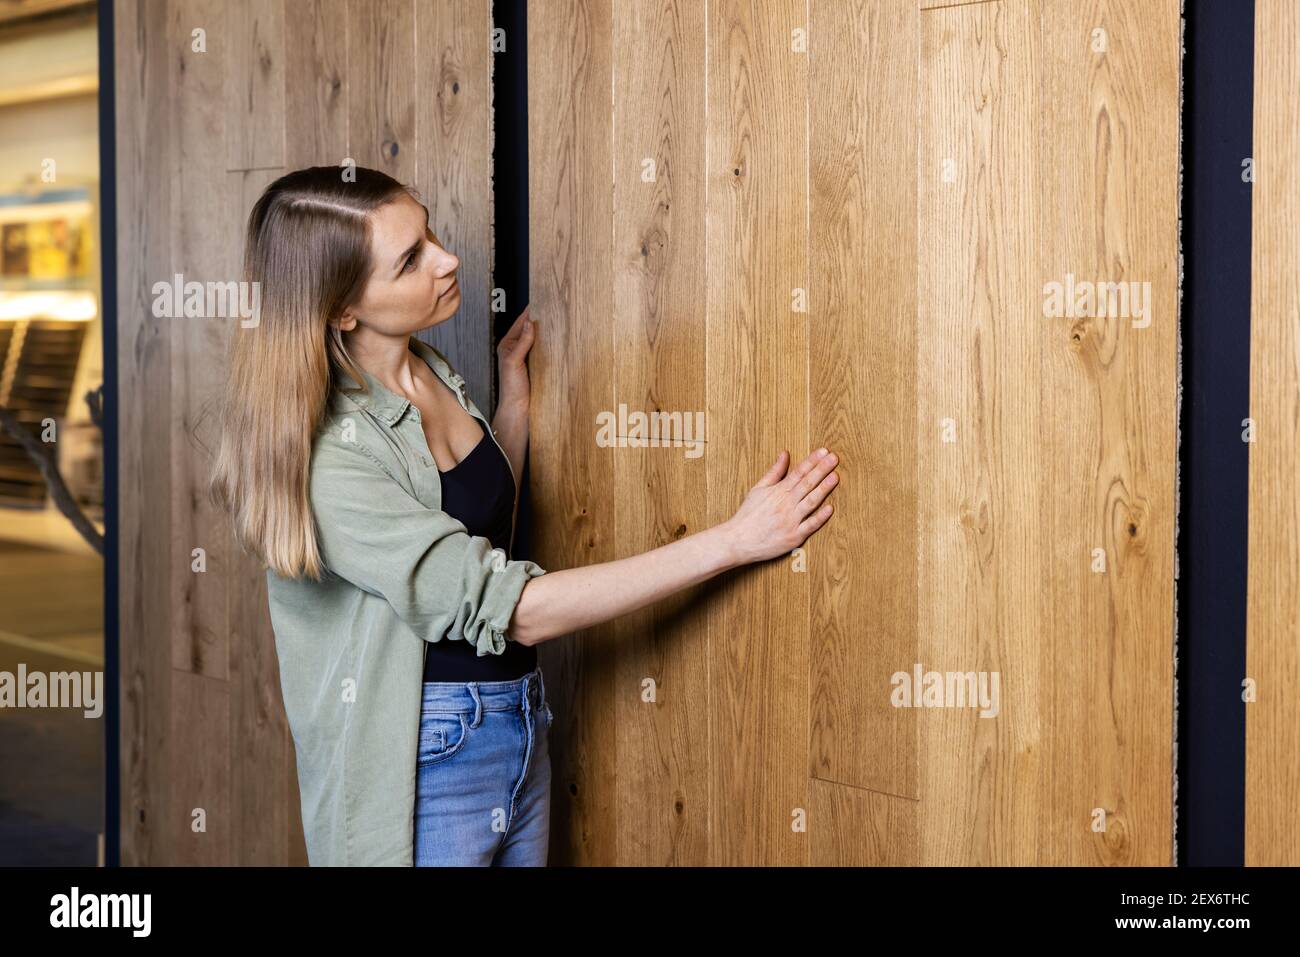 young woman choosing materials for her new home at interior design store Stock Photo